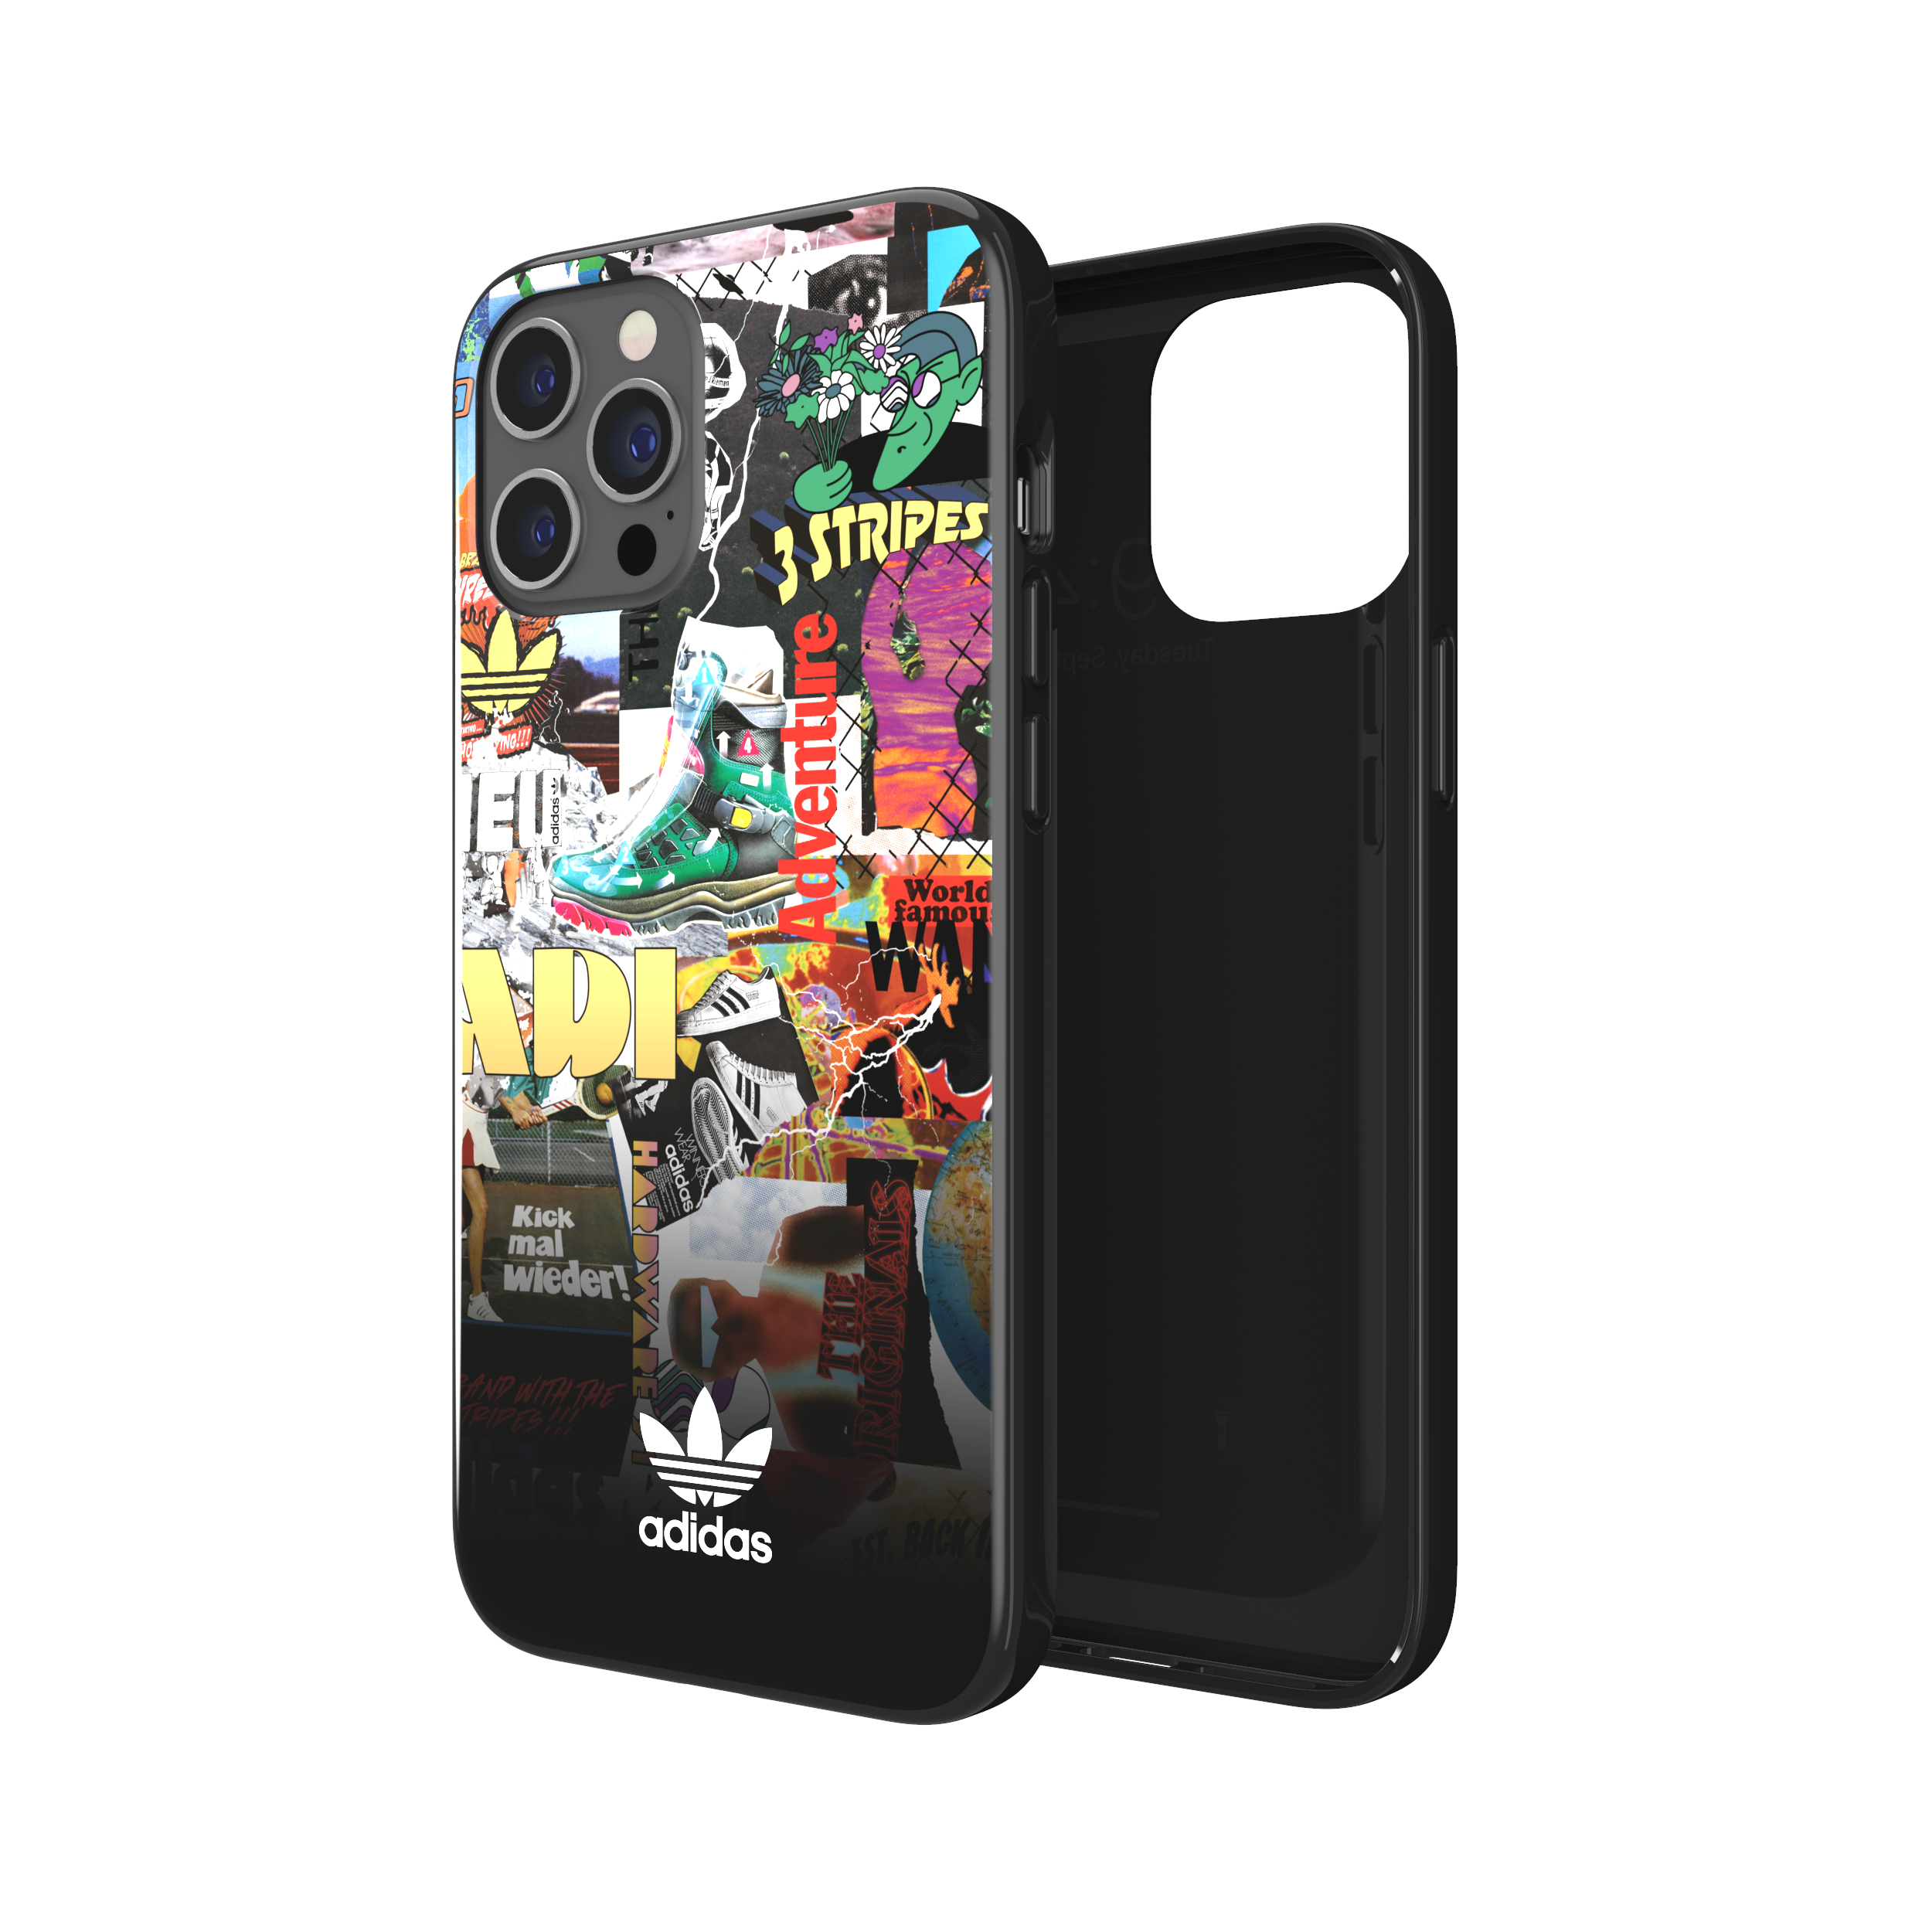 adidas SNAP Apple iPhone 12 Pro Max Graphic Case - Back cover w/ Trefoil Design, Scratch & Drop Protection w/ TPU Bumper, Wireless Charging Compatible - Colourful